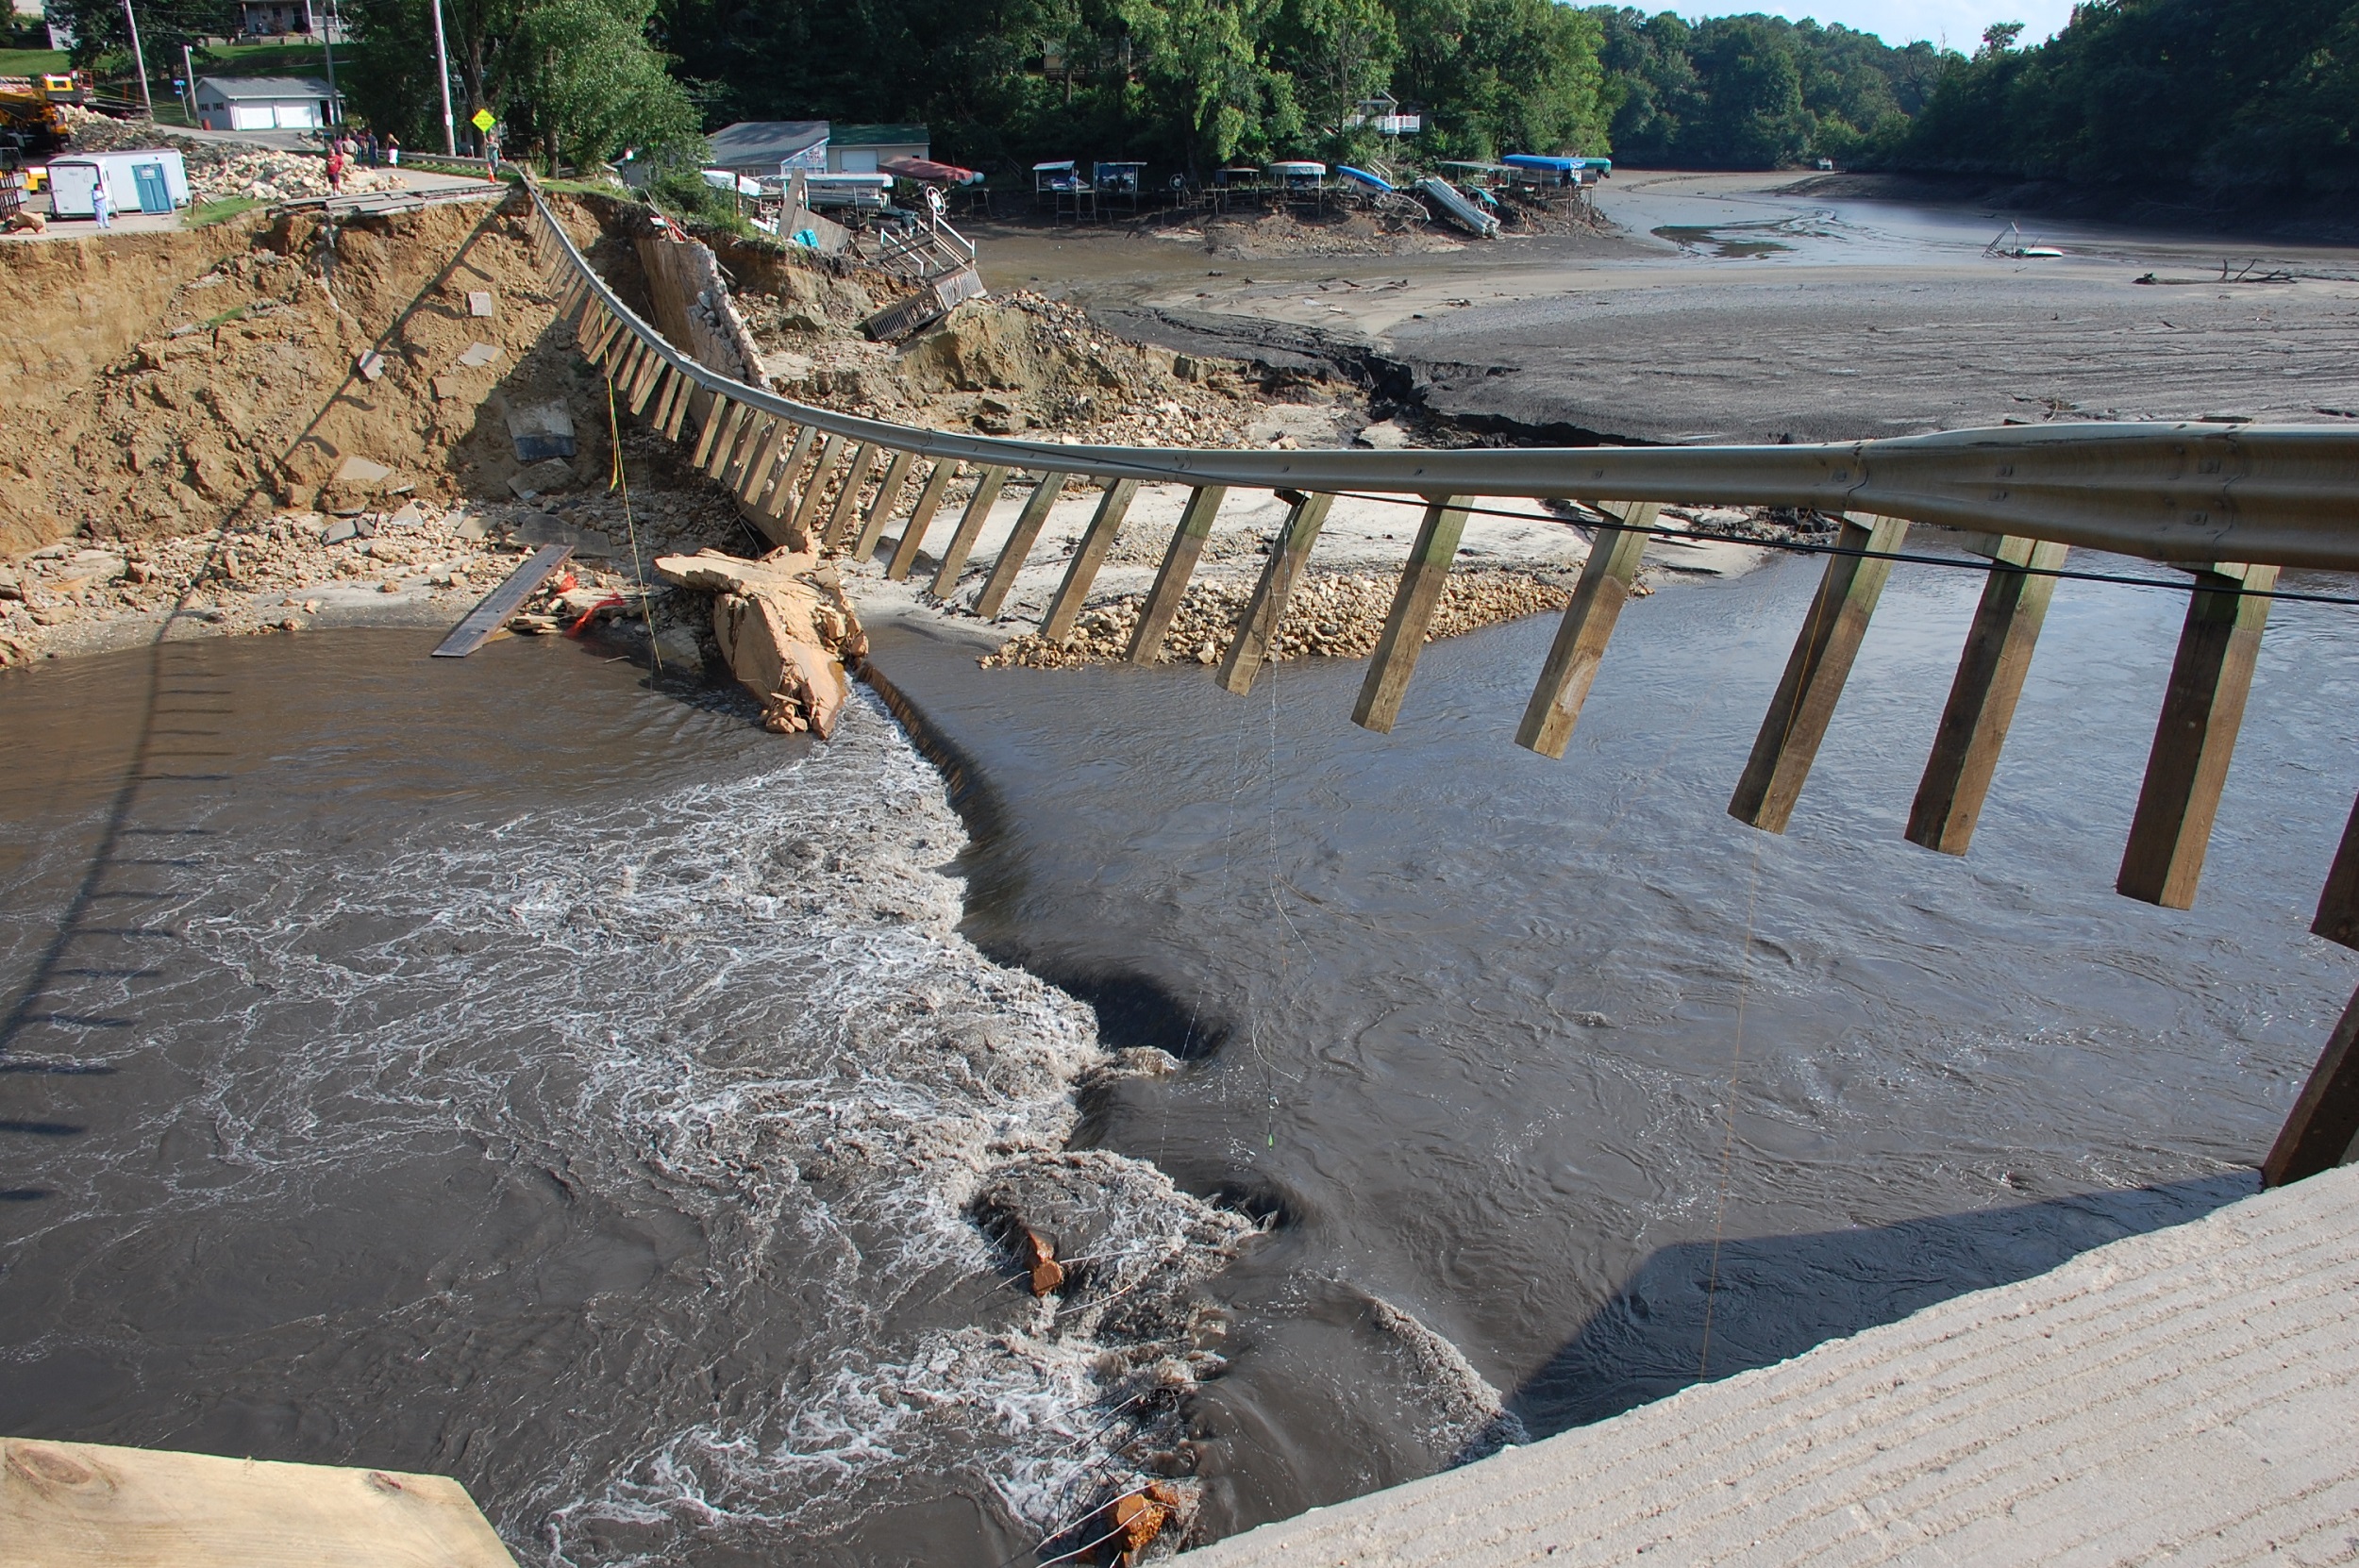 The remains of the Lake Delhi Dam, in Iowa, after the 59-foot-high structure failed during a heavy rainstorm in July 2010. Photo by Josh deBerge / FEMA